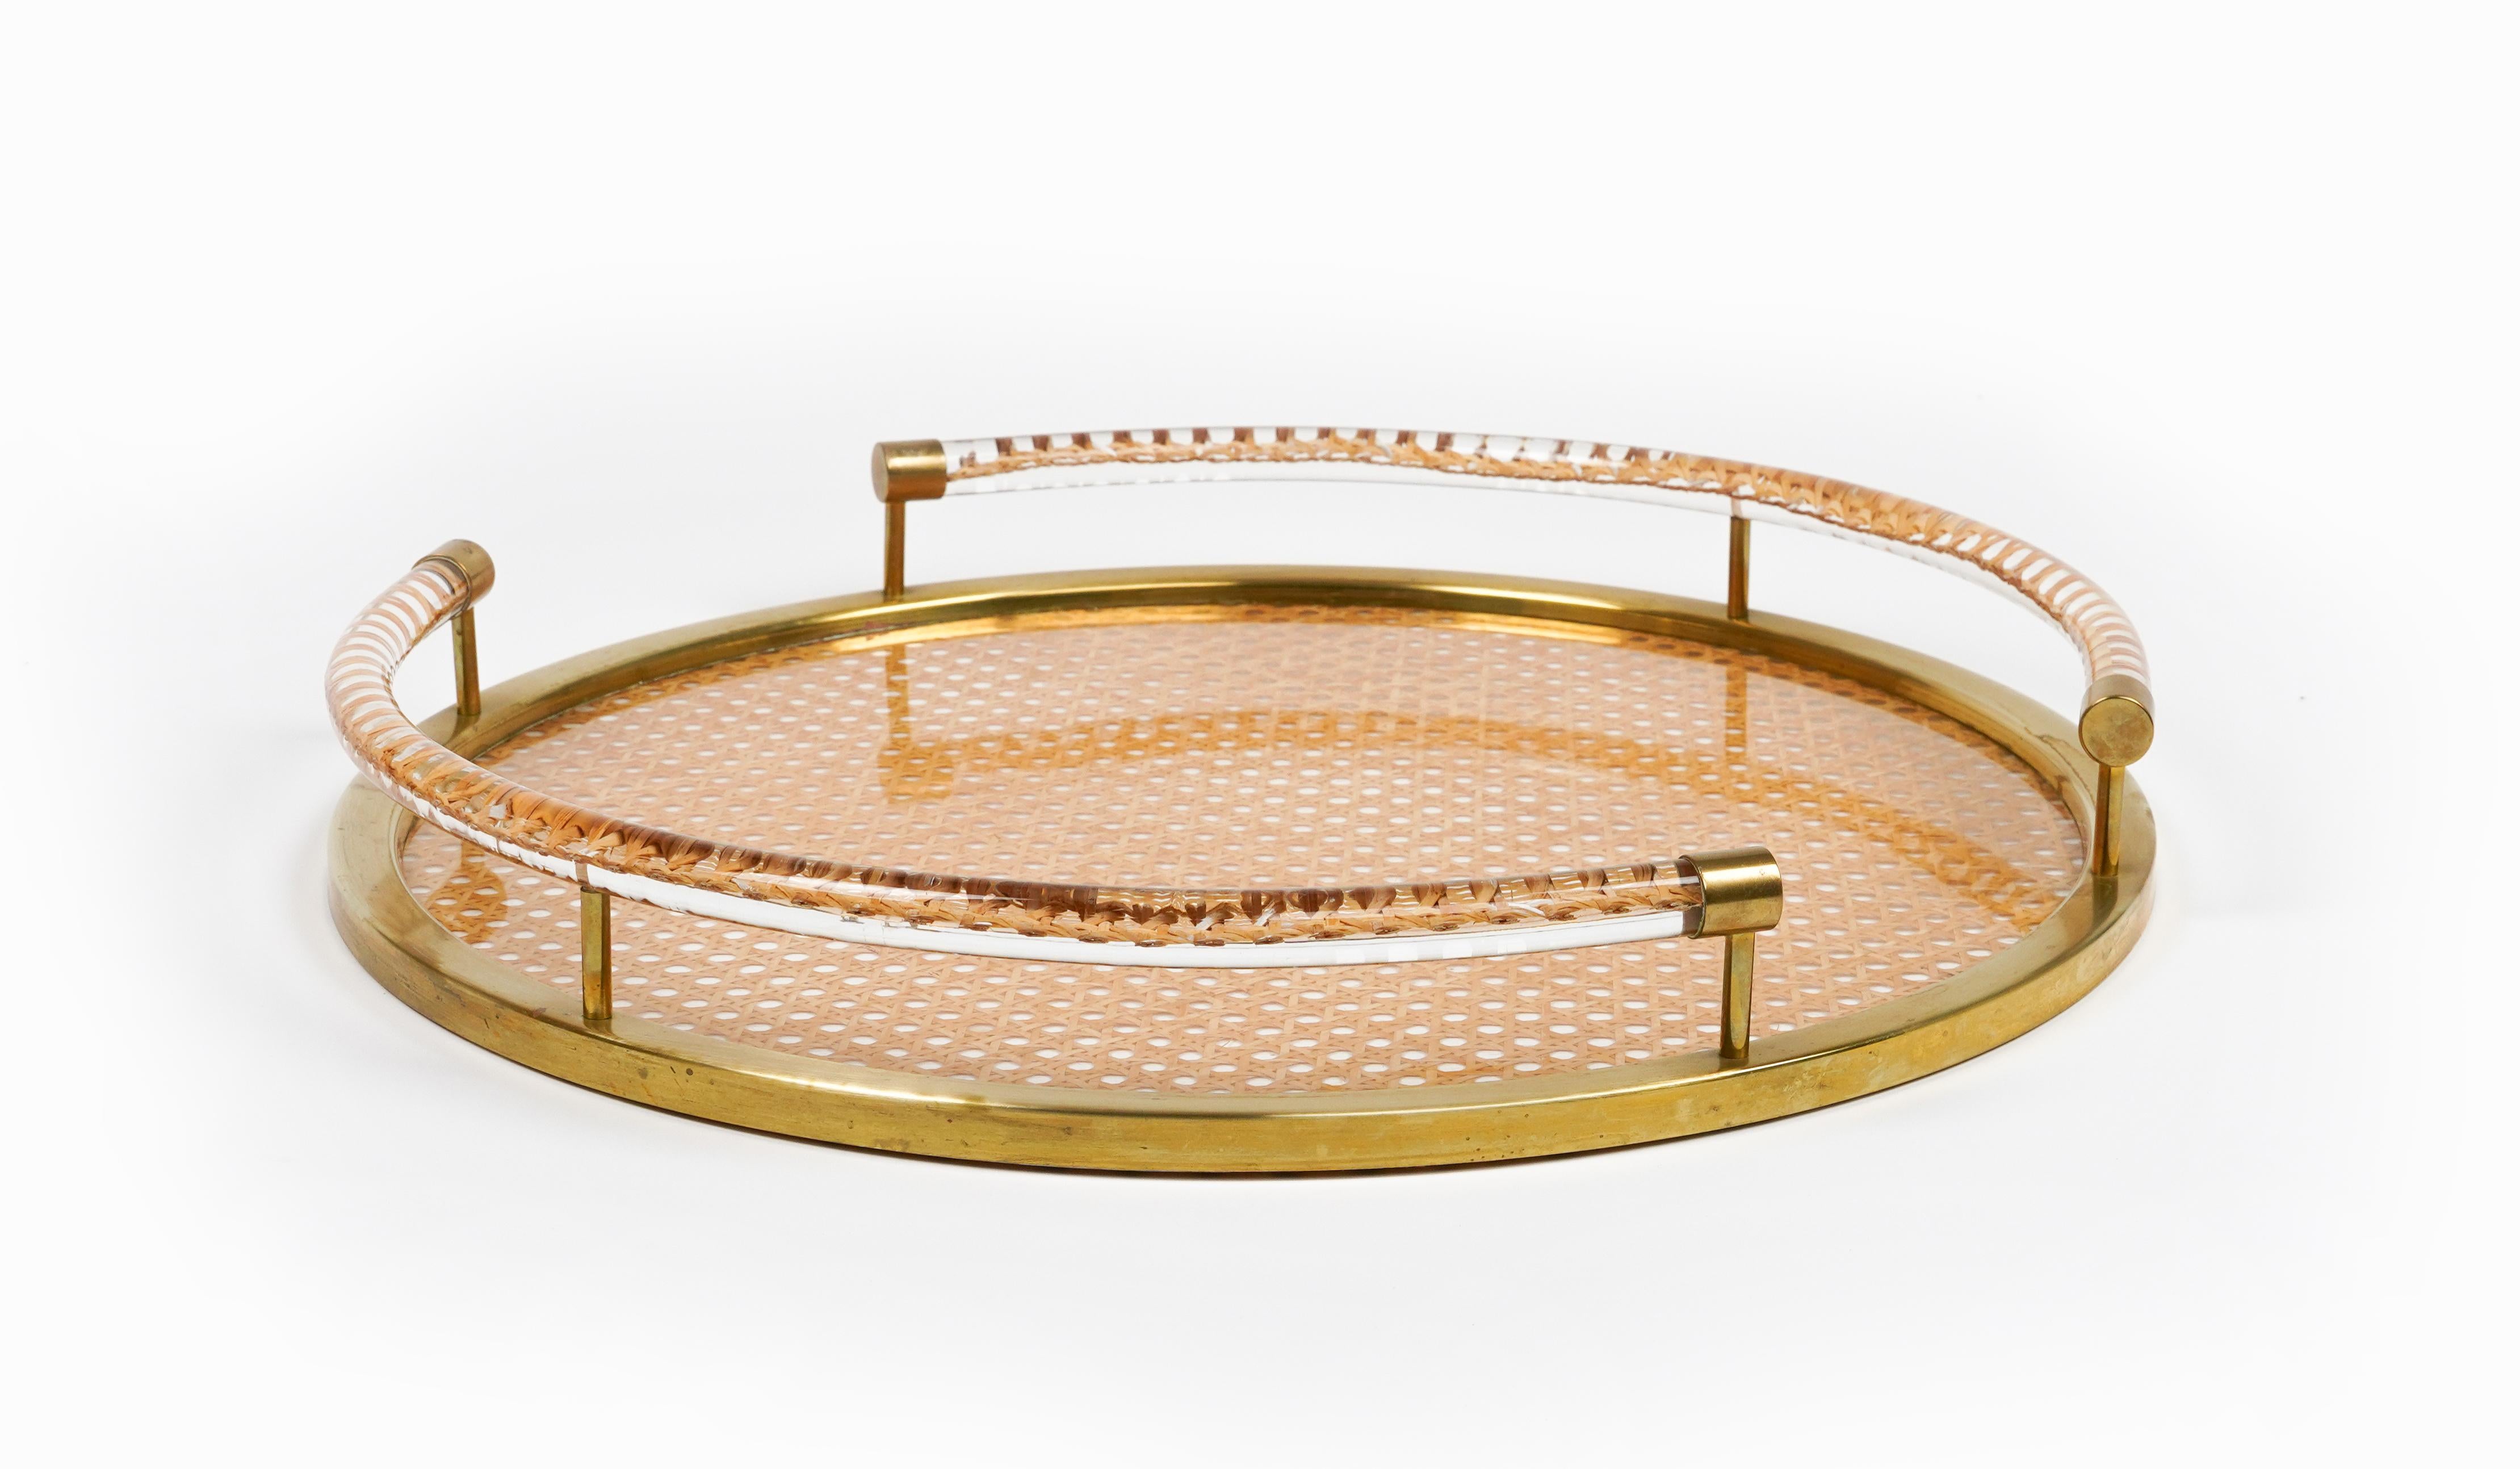 Round Serving Tray in Lucite, Rattan and Brass Christian Dior Style, Italy 1970s For Sale 4